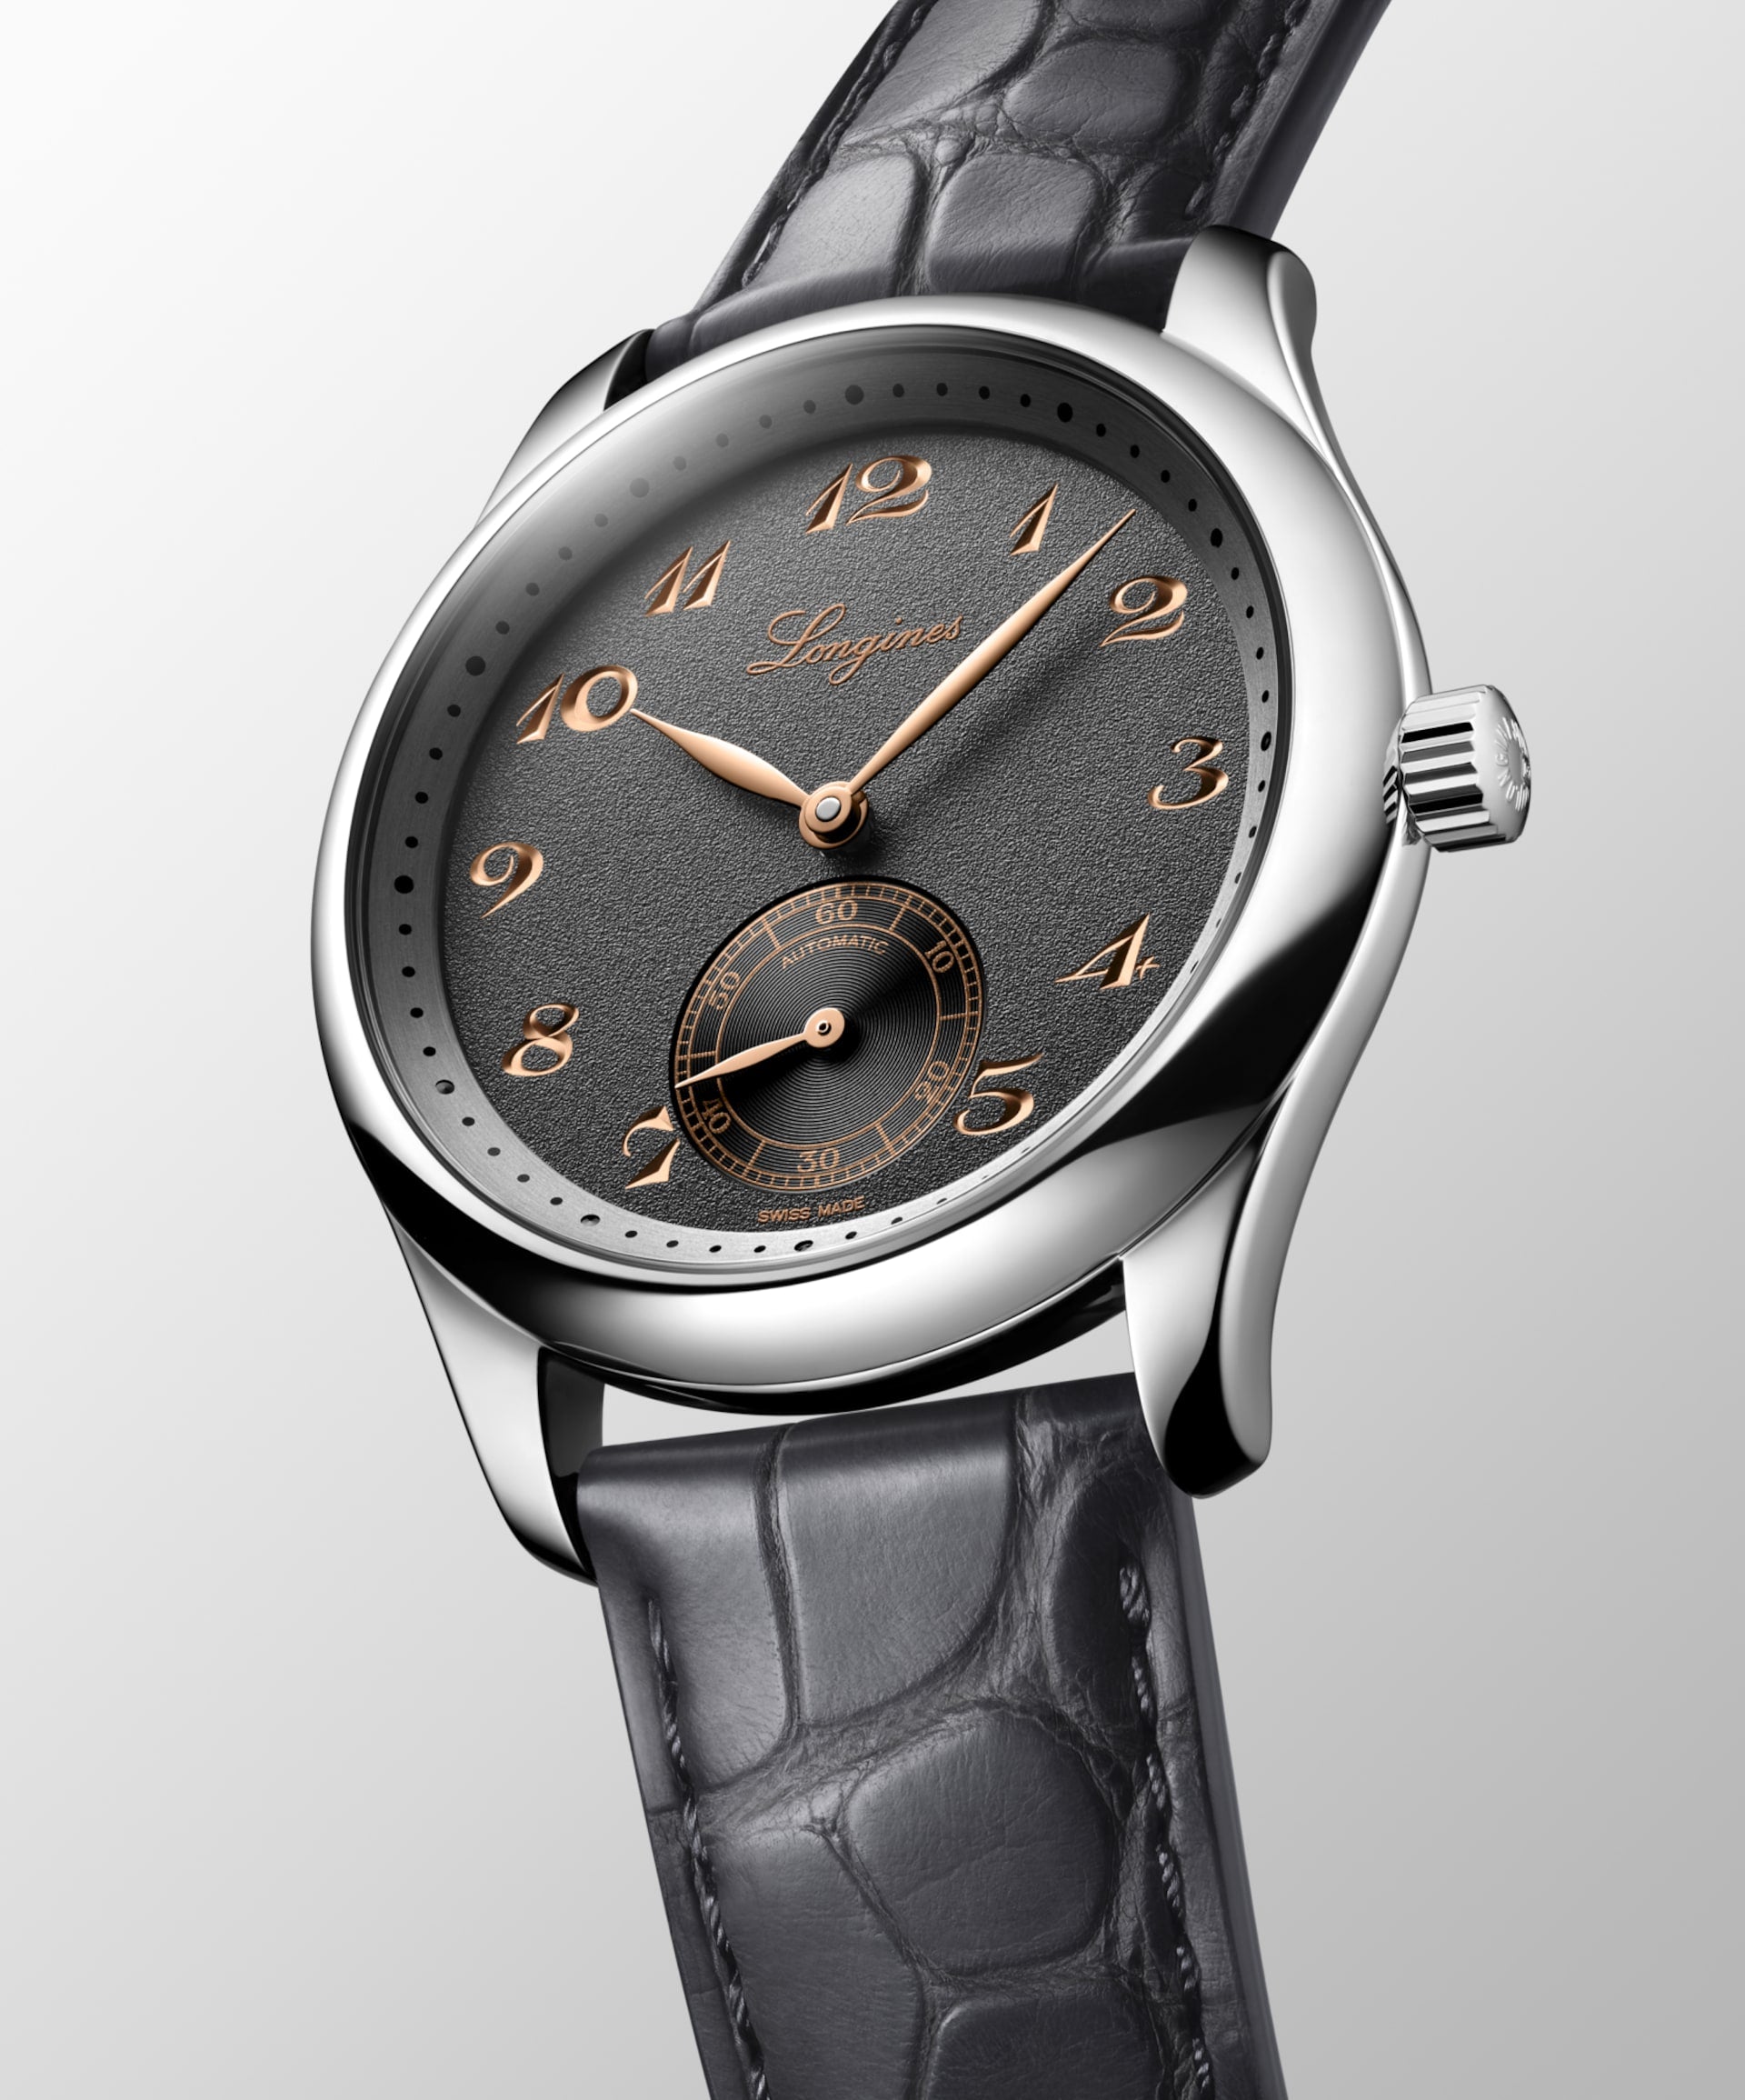 THE LONGINES MASTER COLLECTIONL2.843.4.63.2 L2.843.4.63.2